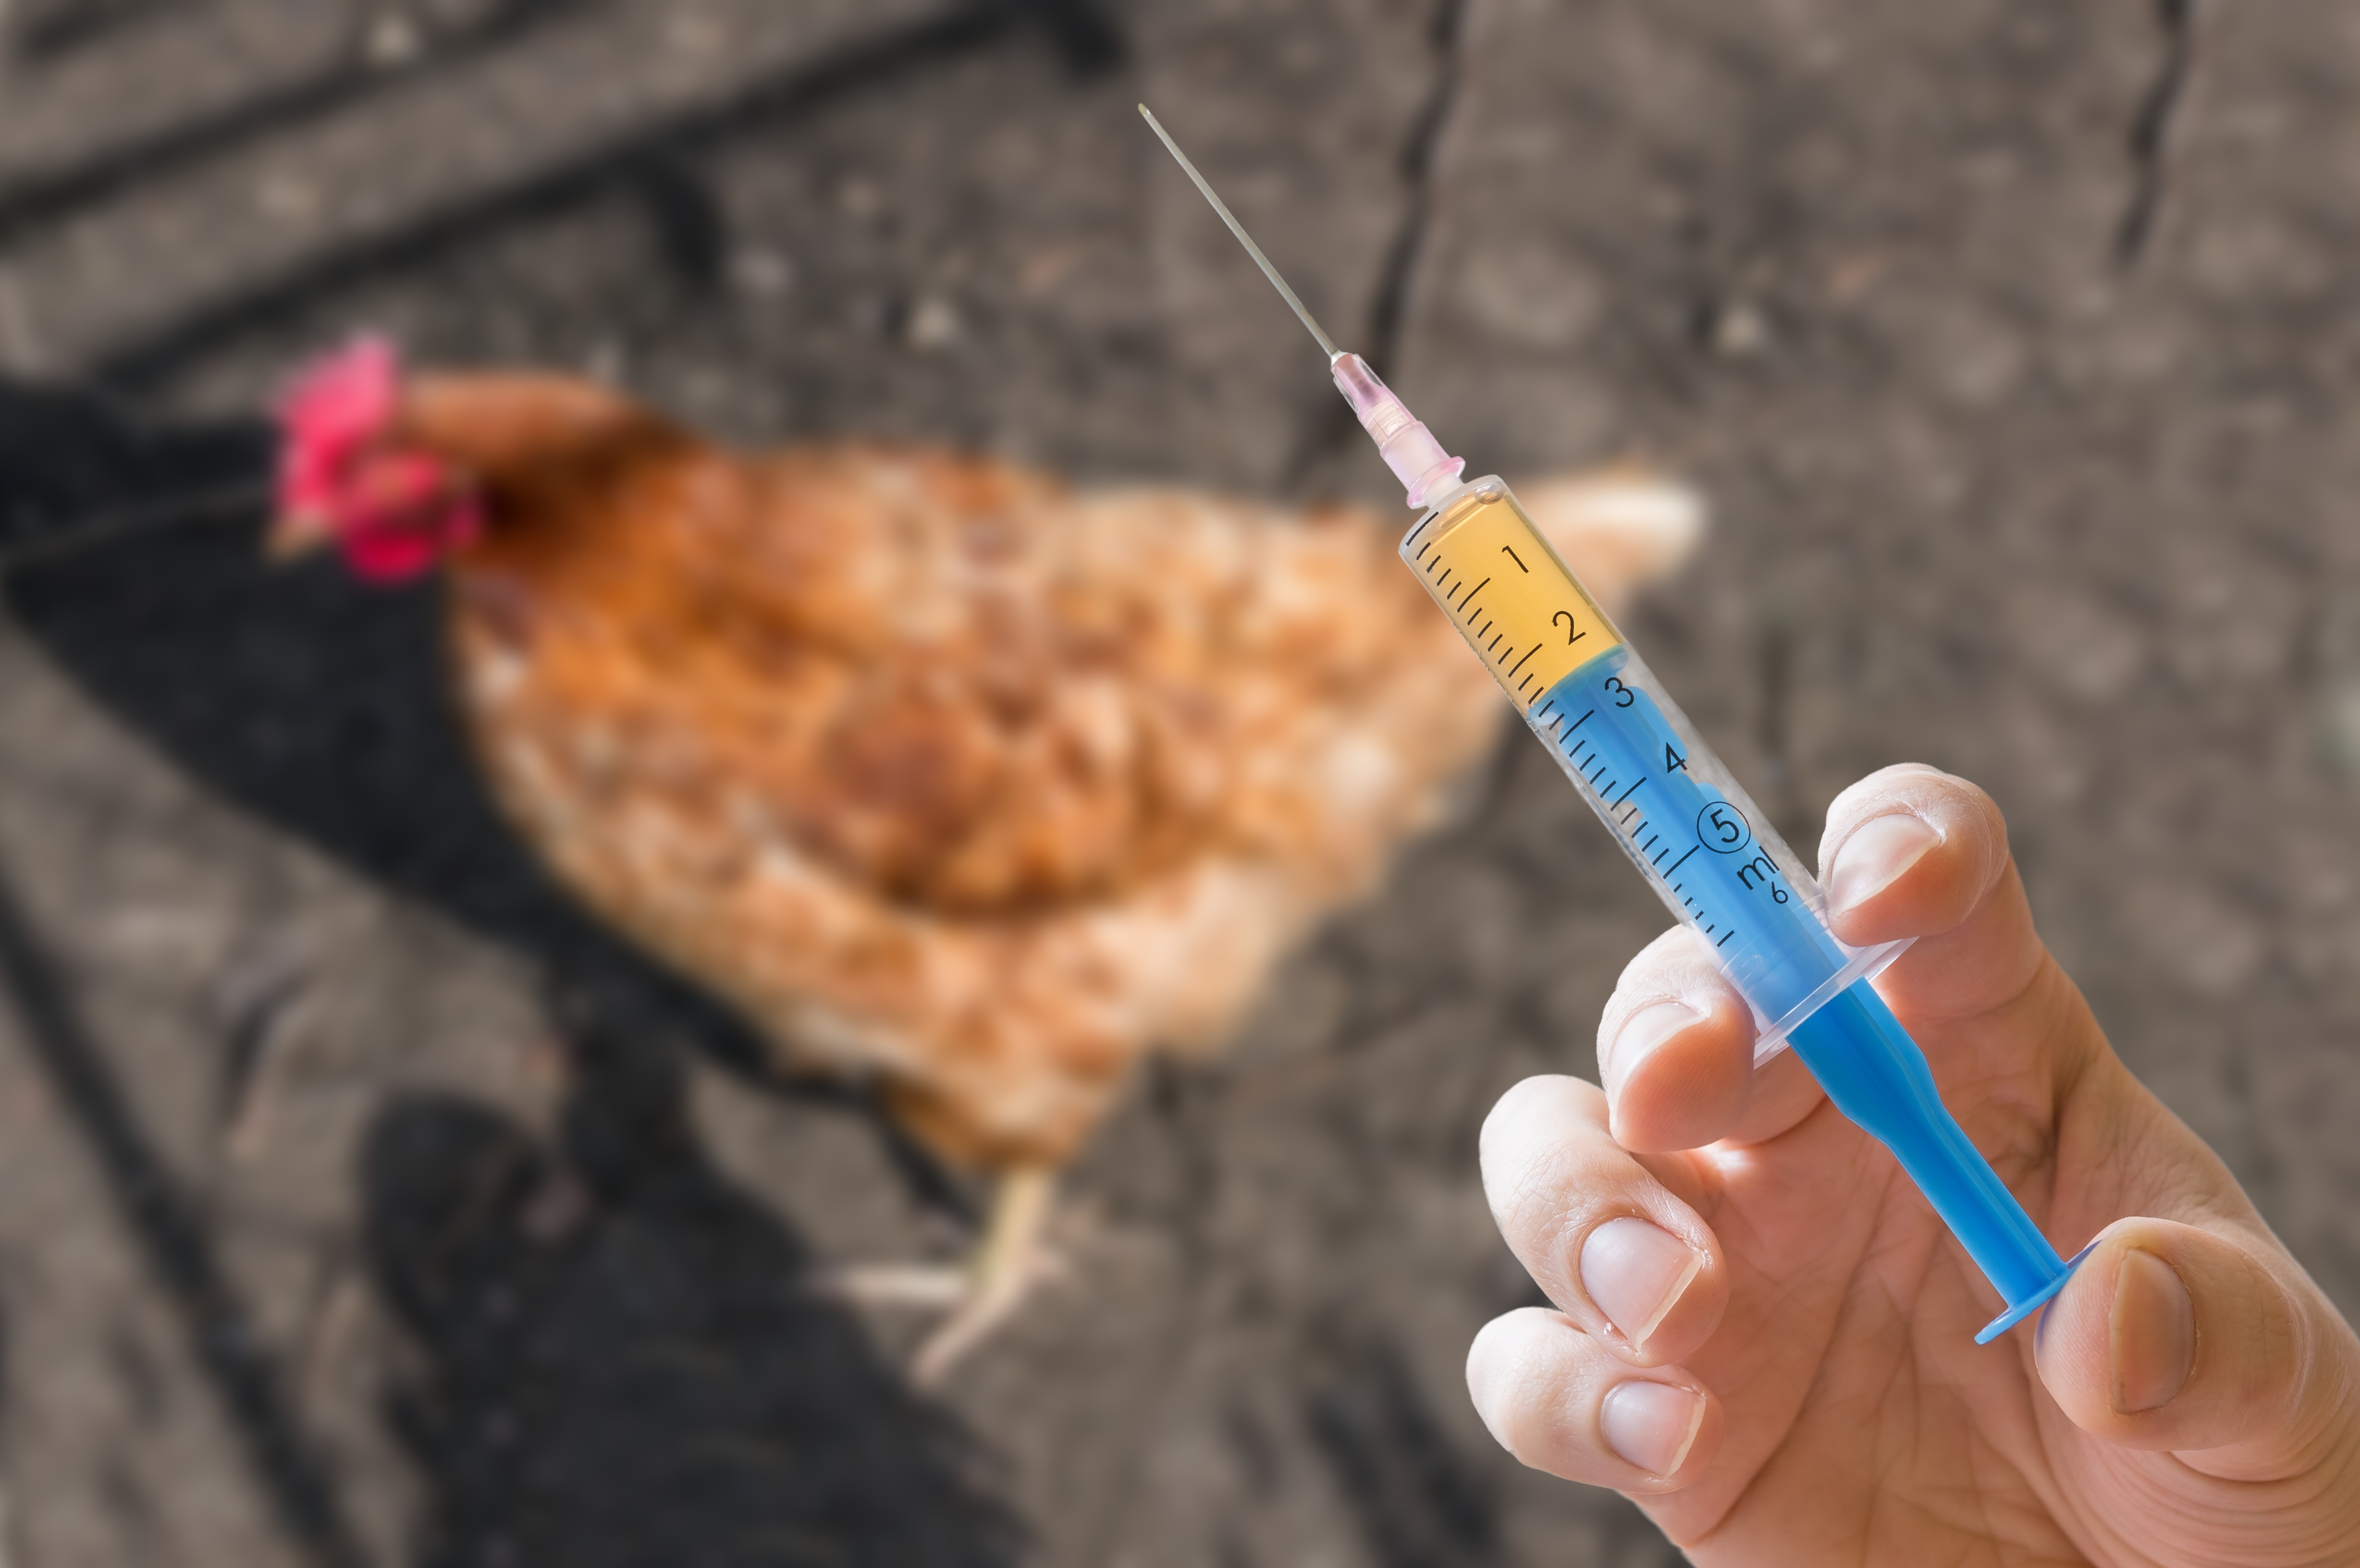 Person holding a syringe full of liquid in front of a chicken